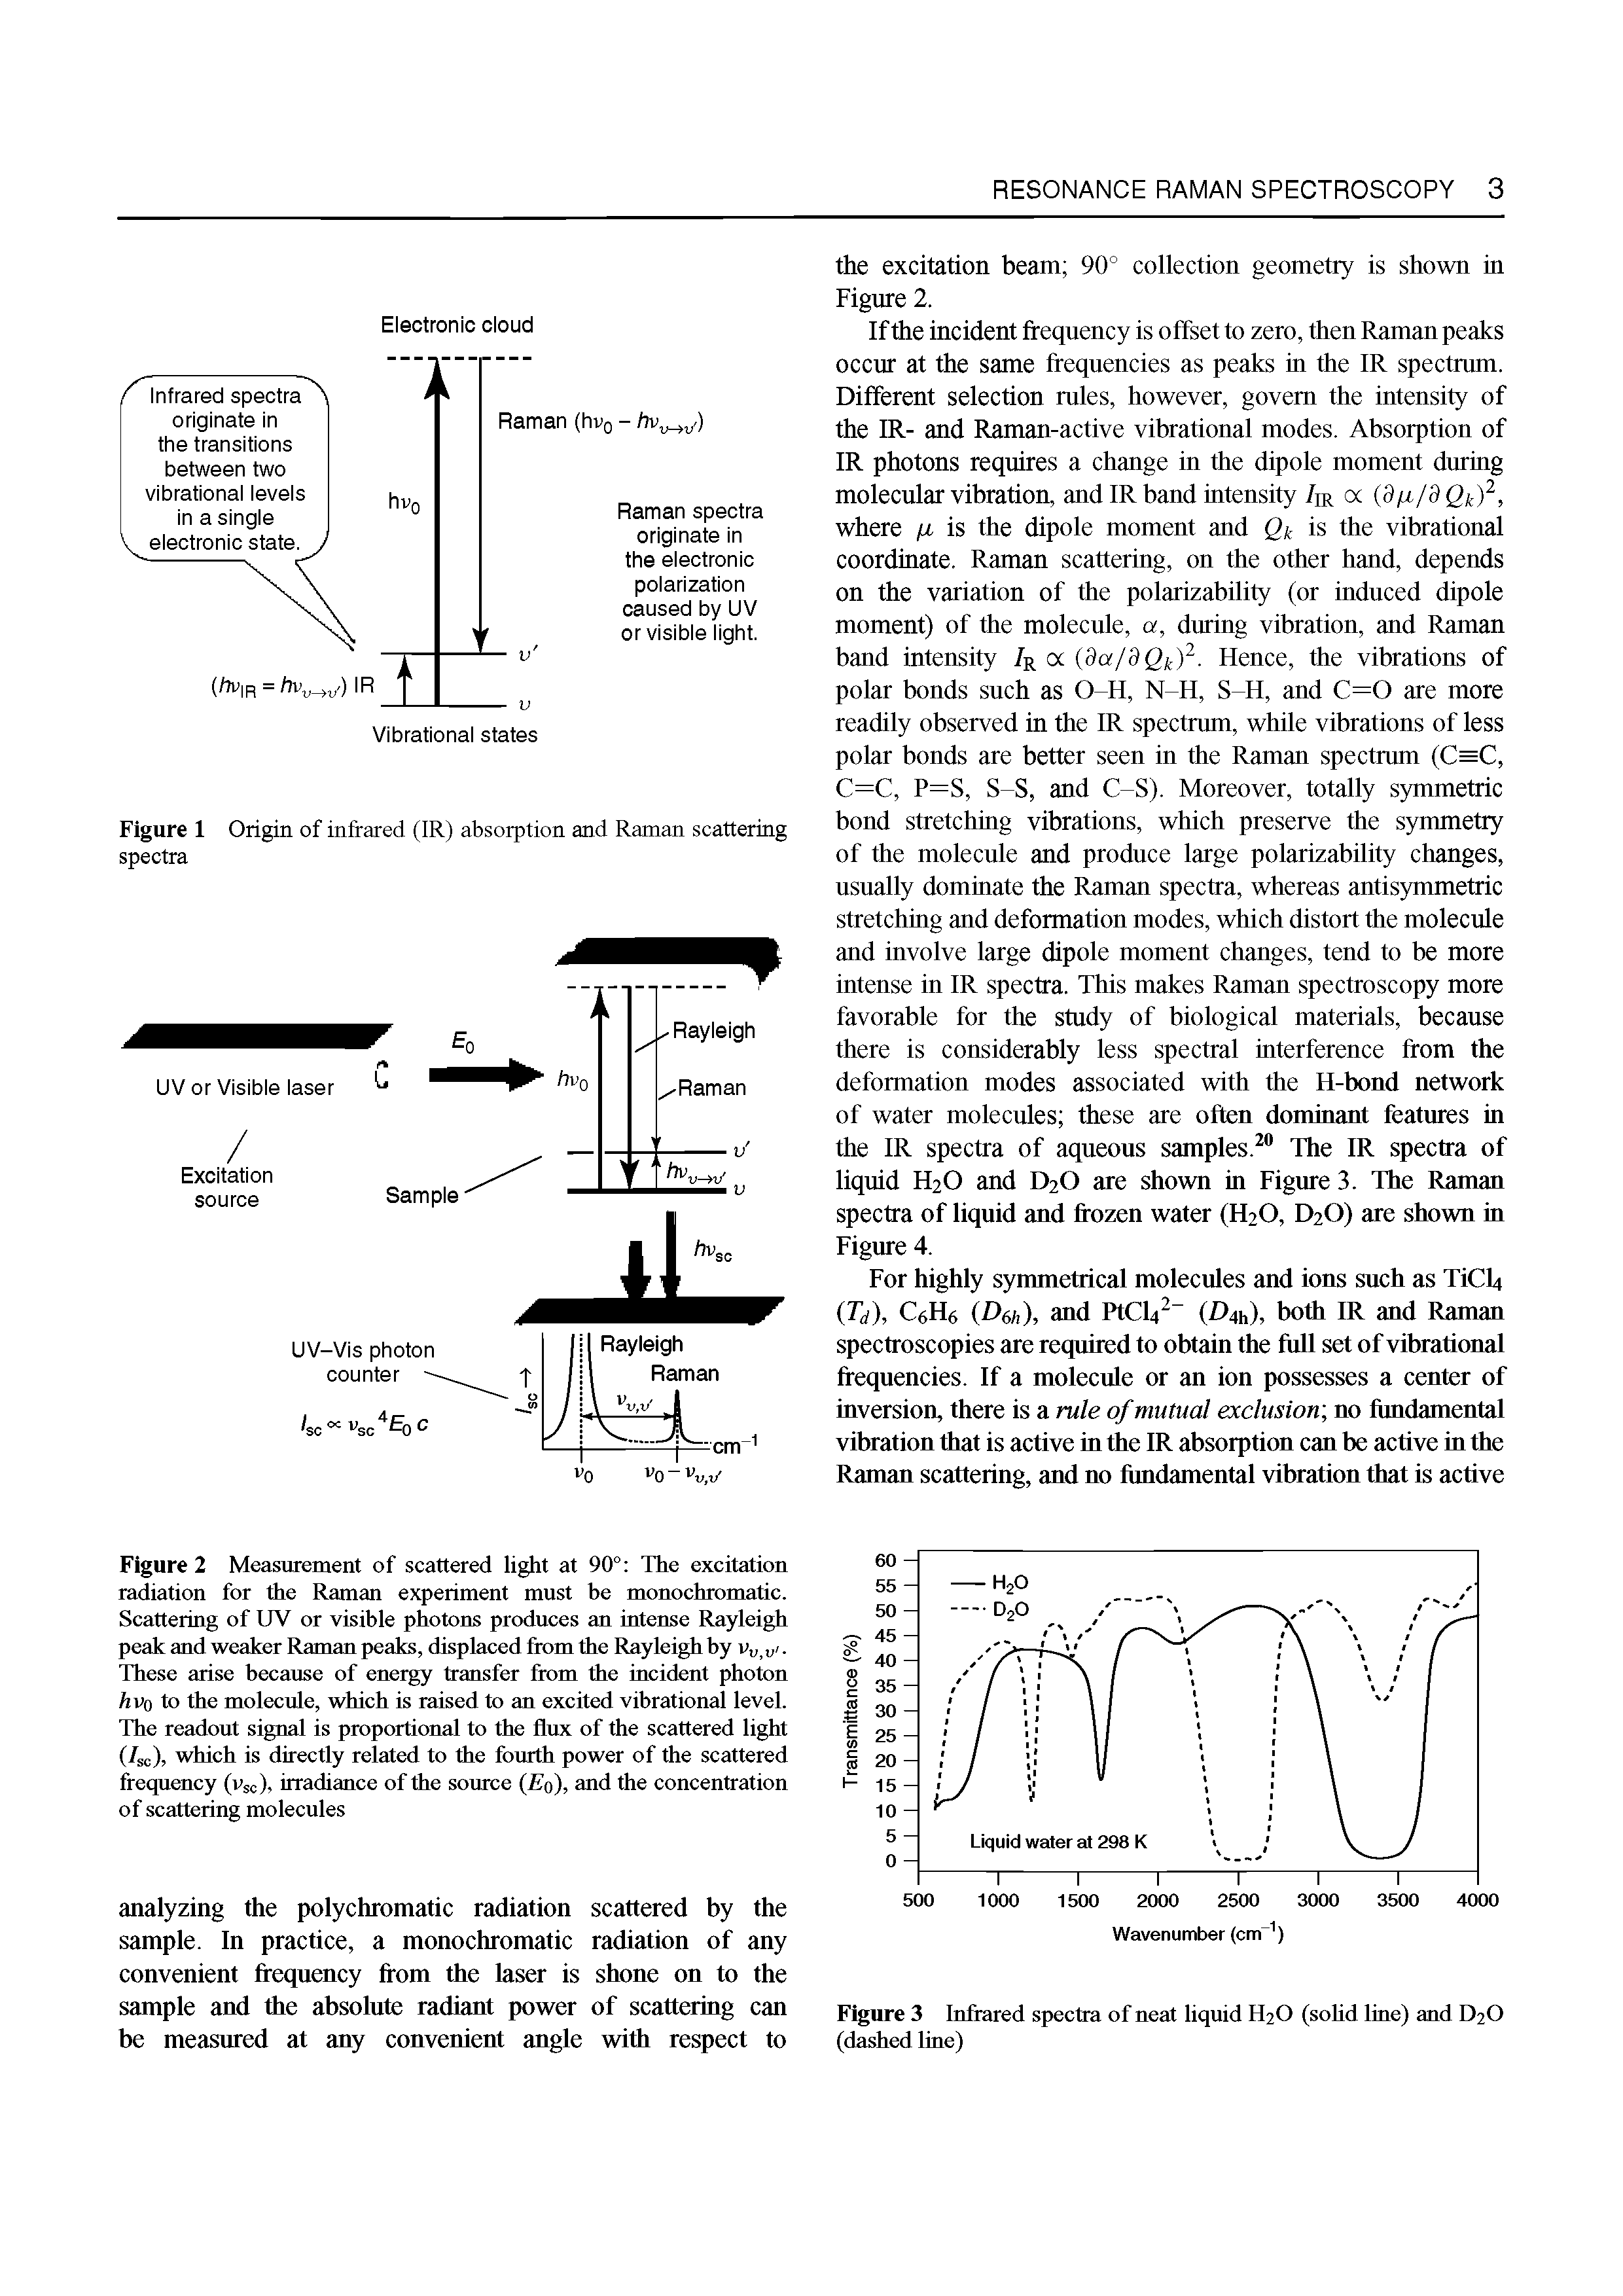 Figure 2 Measurement of scattered light at 90° The excitation radiation for the Raman experiment must be monochromatic. Scattering of UV or visible photons produces an intense Rayleigh peak and weaker Raman peaks, displaced from the Rayleigh by. These arise because of energy transfer from the incident photon hvo to the molecule, which is raised to an excited vibrational level. The readout signal is proportional to the flux of the scattered light (7sc), which is directly related to the fourth power of the scattered frequency (vsc), irradiance of the source ( 0), and the concentration of scattering molecules...